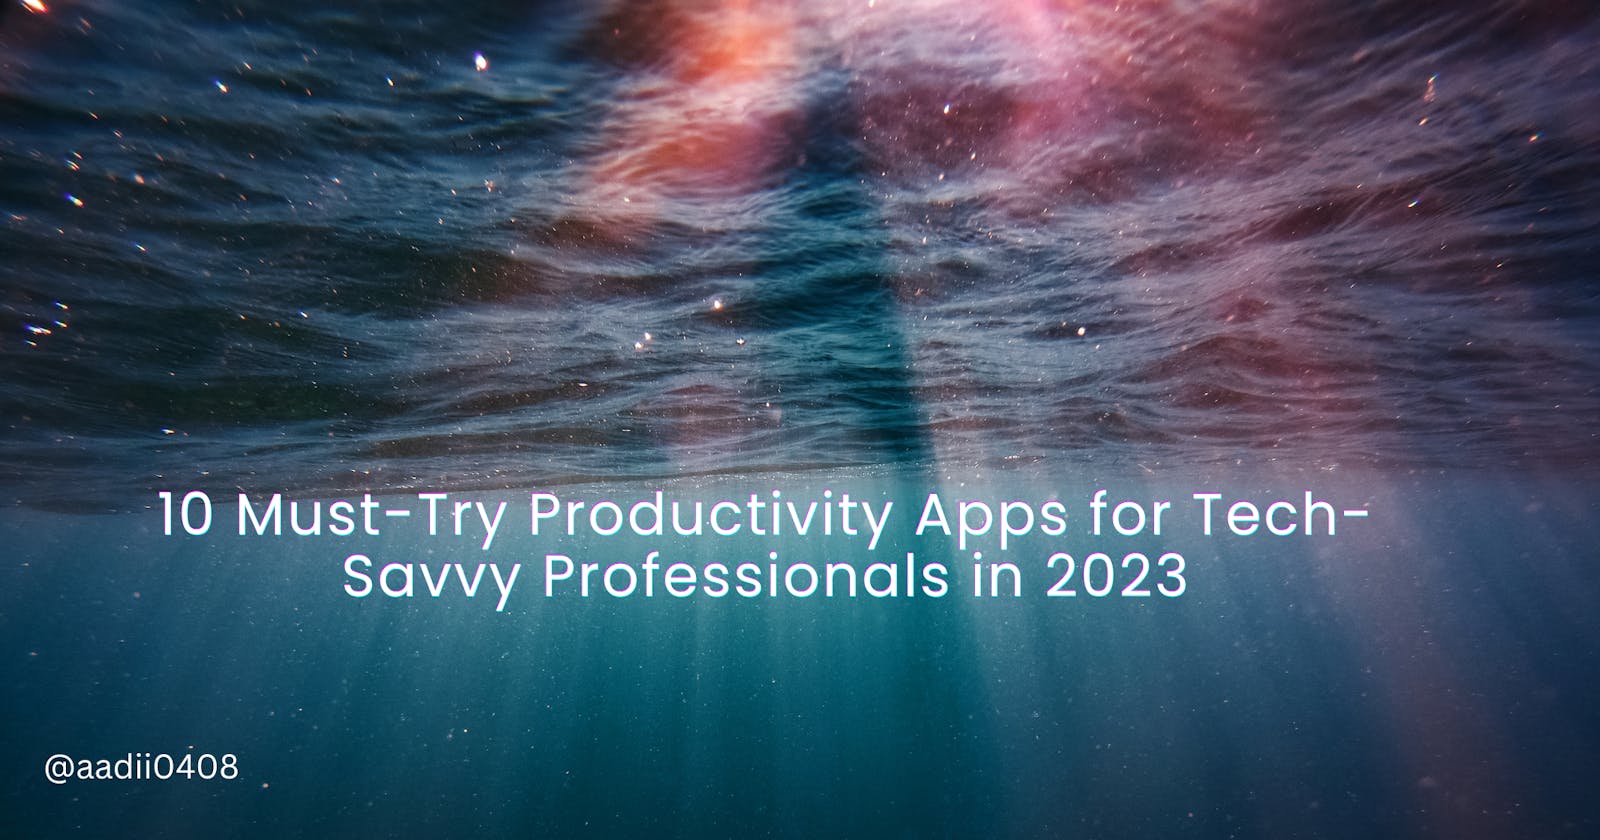 "10 Must-Try Productivity Apps for Tech-Savvy Professionals in 2023"